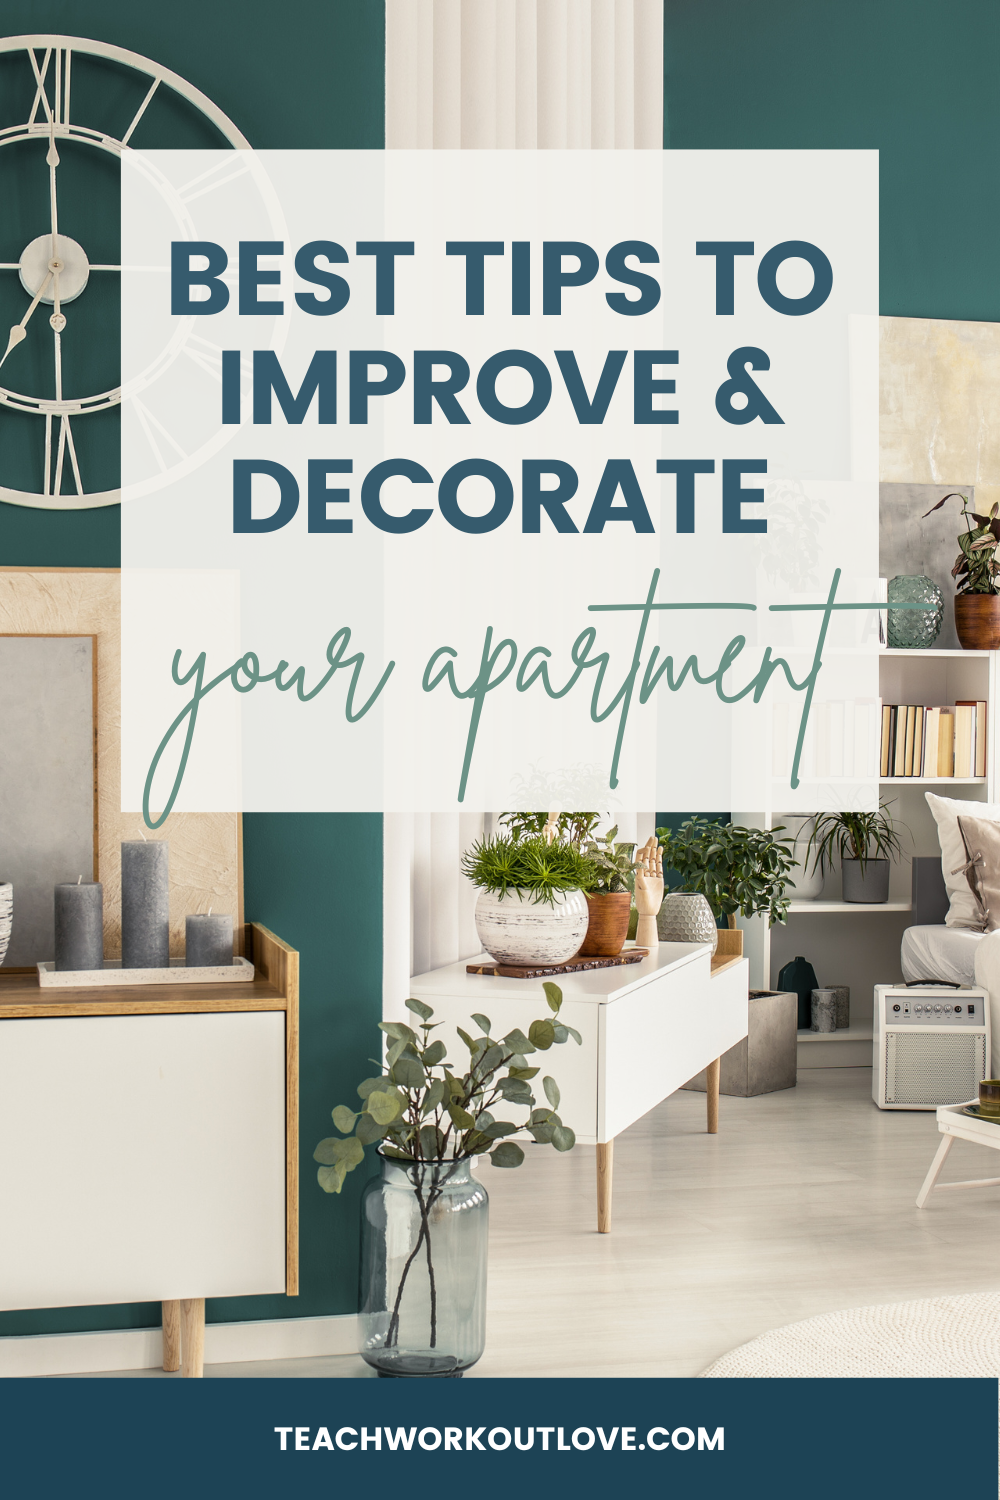 Because a rental is not your own, it can be difficult to personalize it to reflect your interests and add the finishing touches that make a place seem like home. Here's some great tips to decorate your apartment.